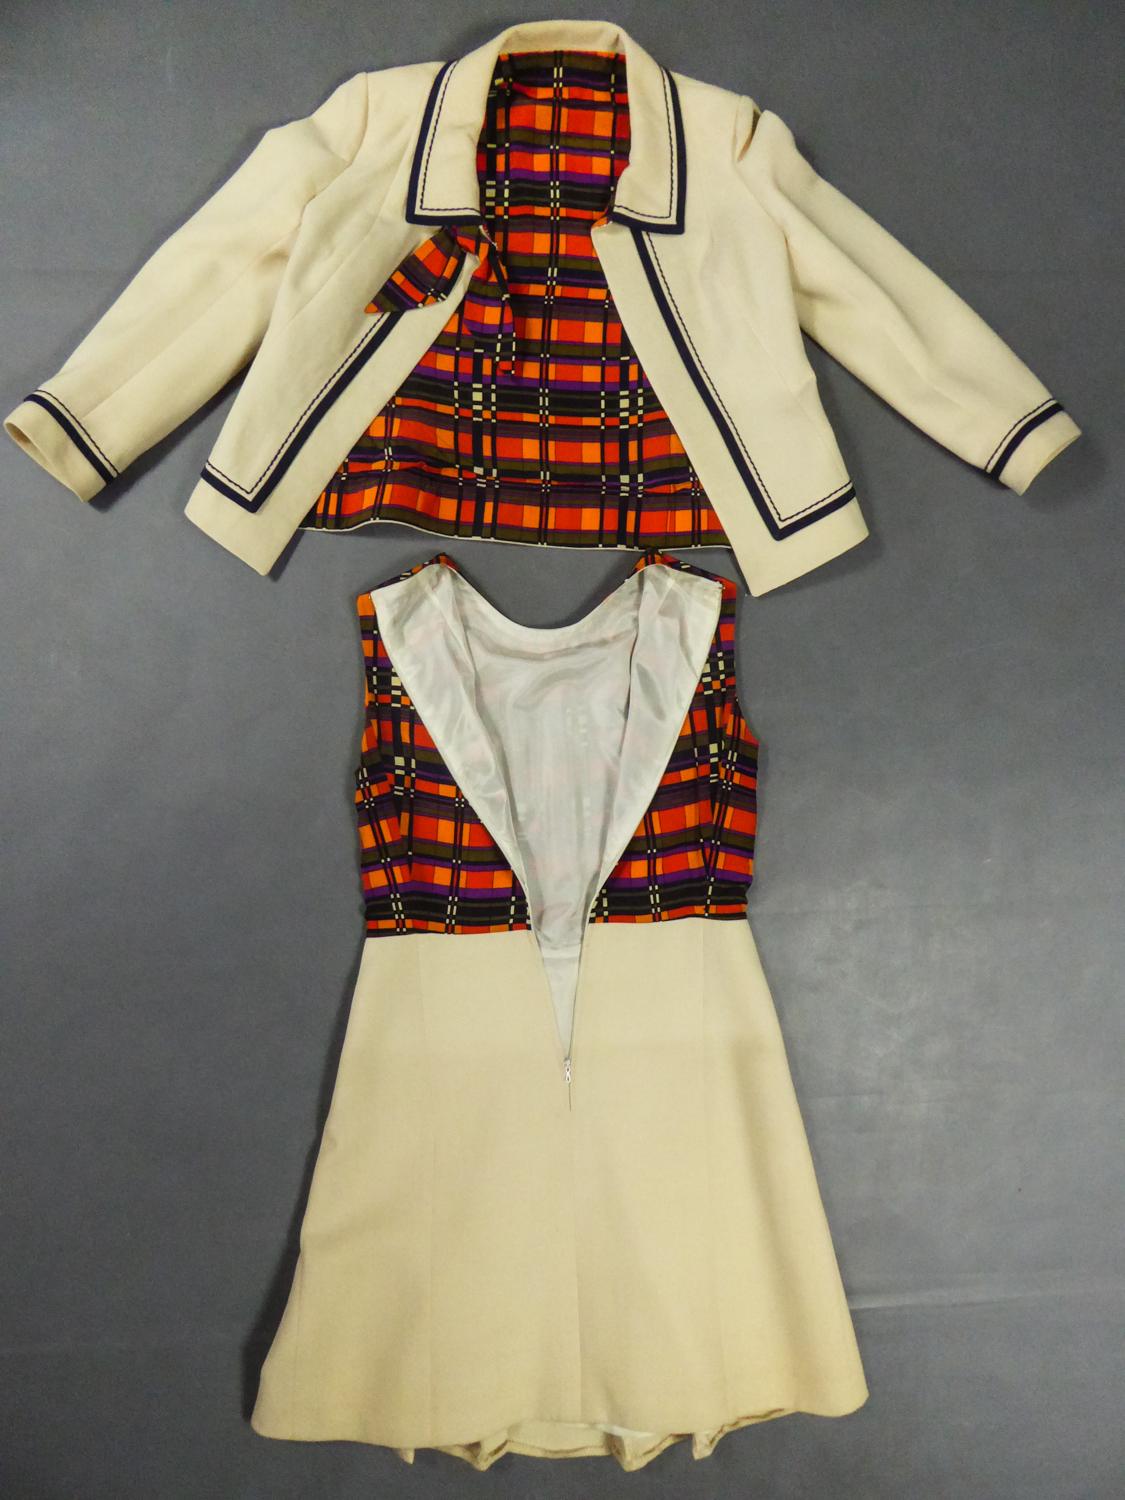 Circa 1972
France

Dress and jacket in wool and silk, anonymous Haute Couture without label around 1972. Straight dress with cream nylon lining and zip fastening at the back. Sleeveless top and crew-neck in checked silk taffeta. Elegant work of